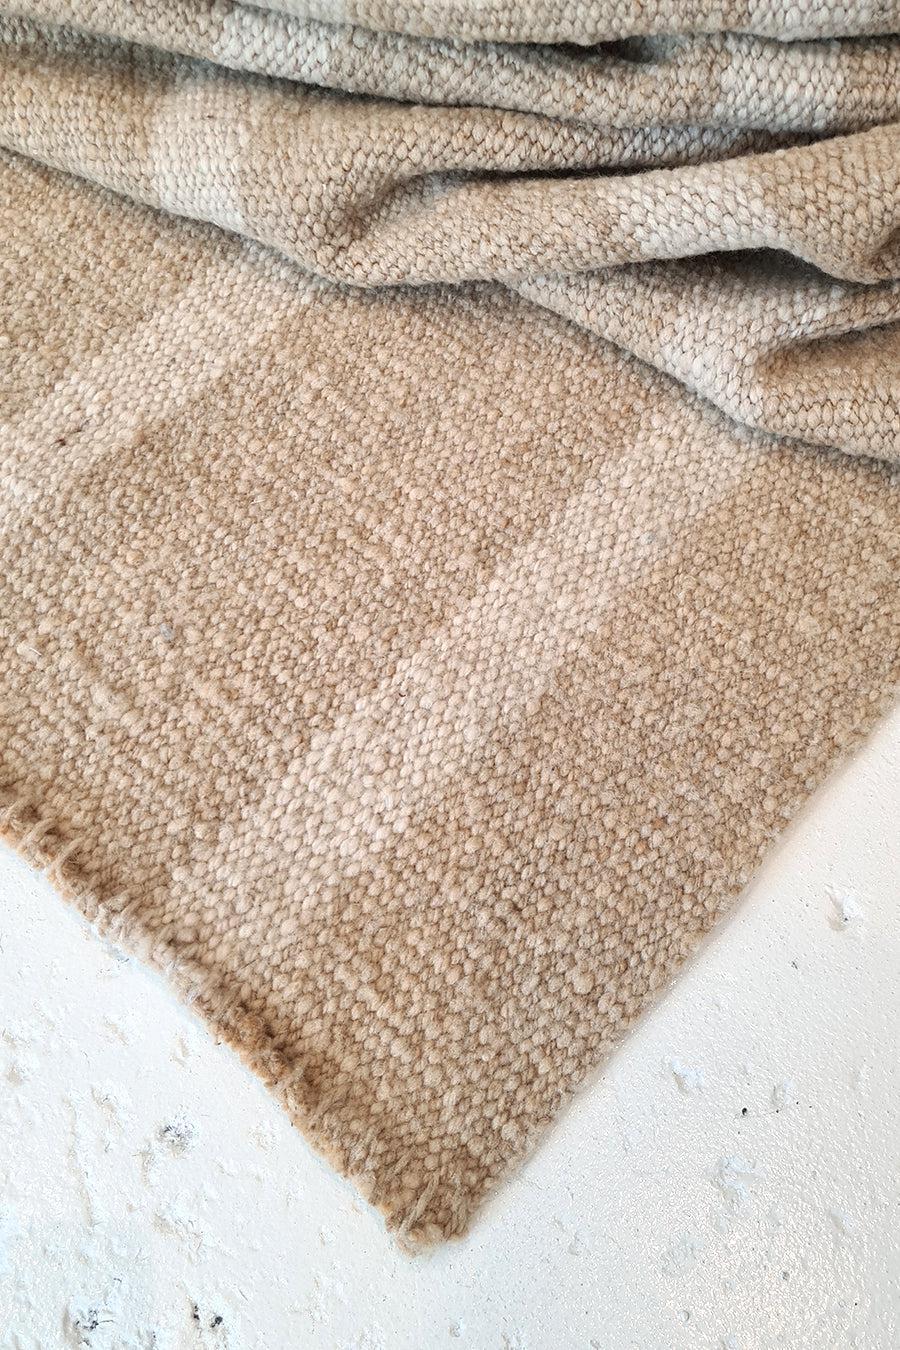 IRUYA RUG | NATURAL & SAND-The Andes Project